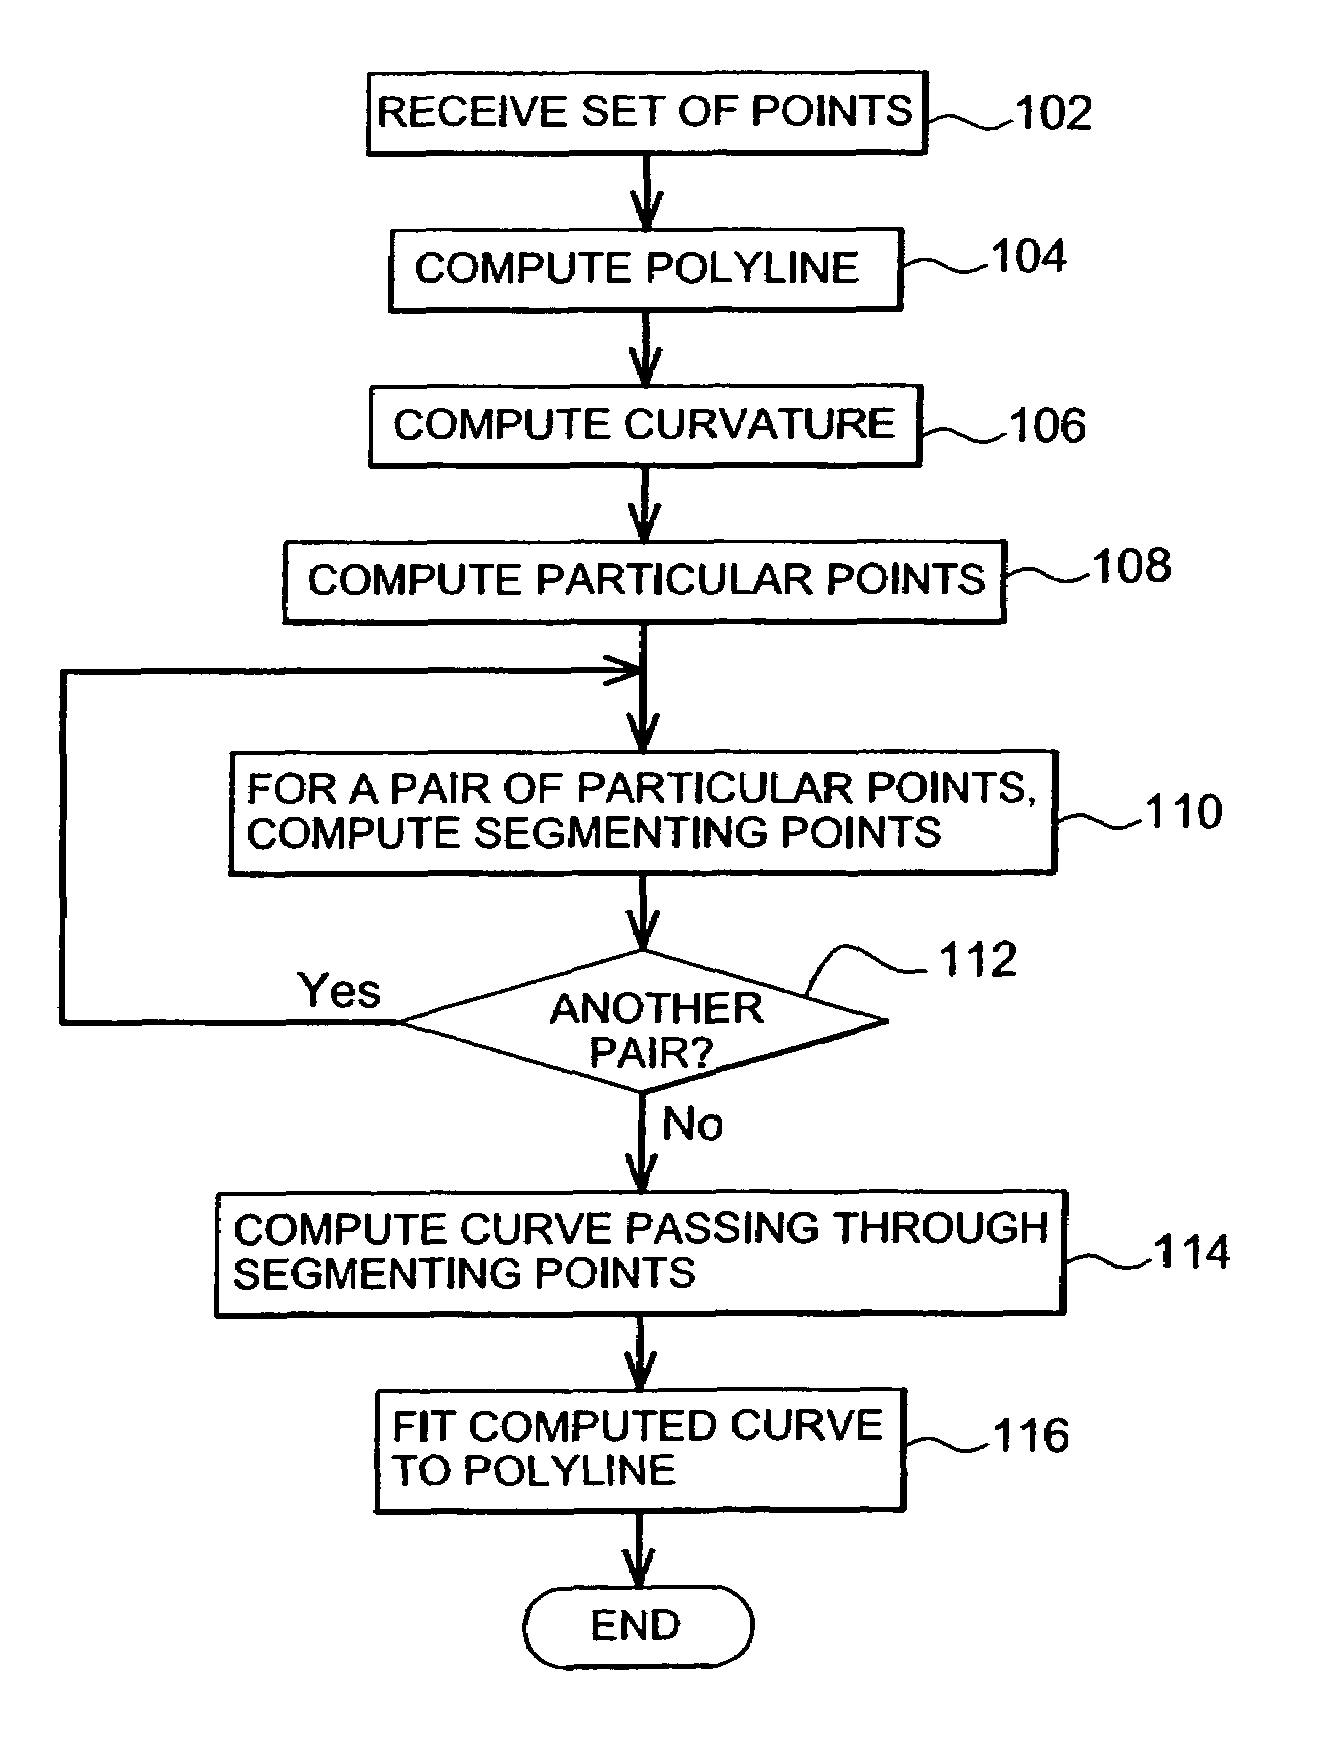 Process for drafting a curve in a computer-aided design system